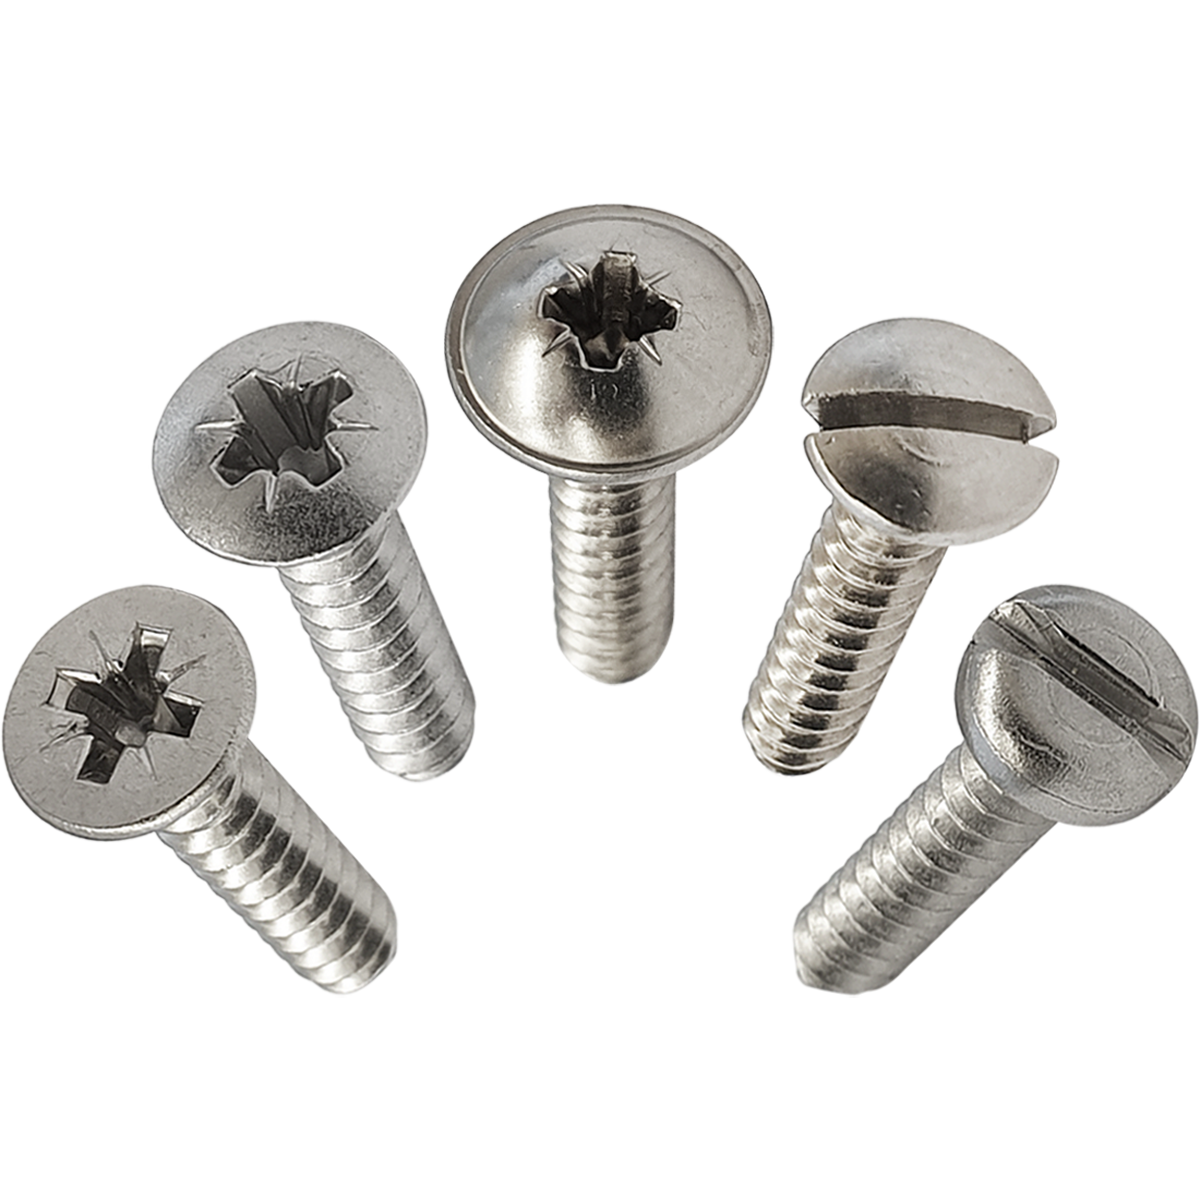 Self-tapping screws, also known as self tappers, come in an extensive selection of diameters, lengths, and head types to suit numerous applications.